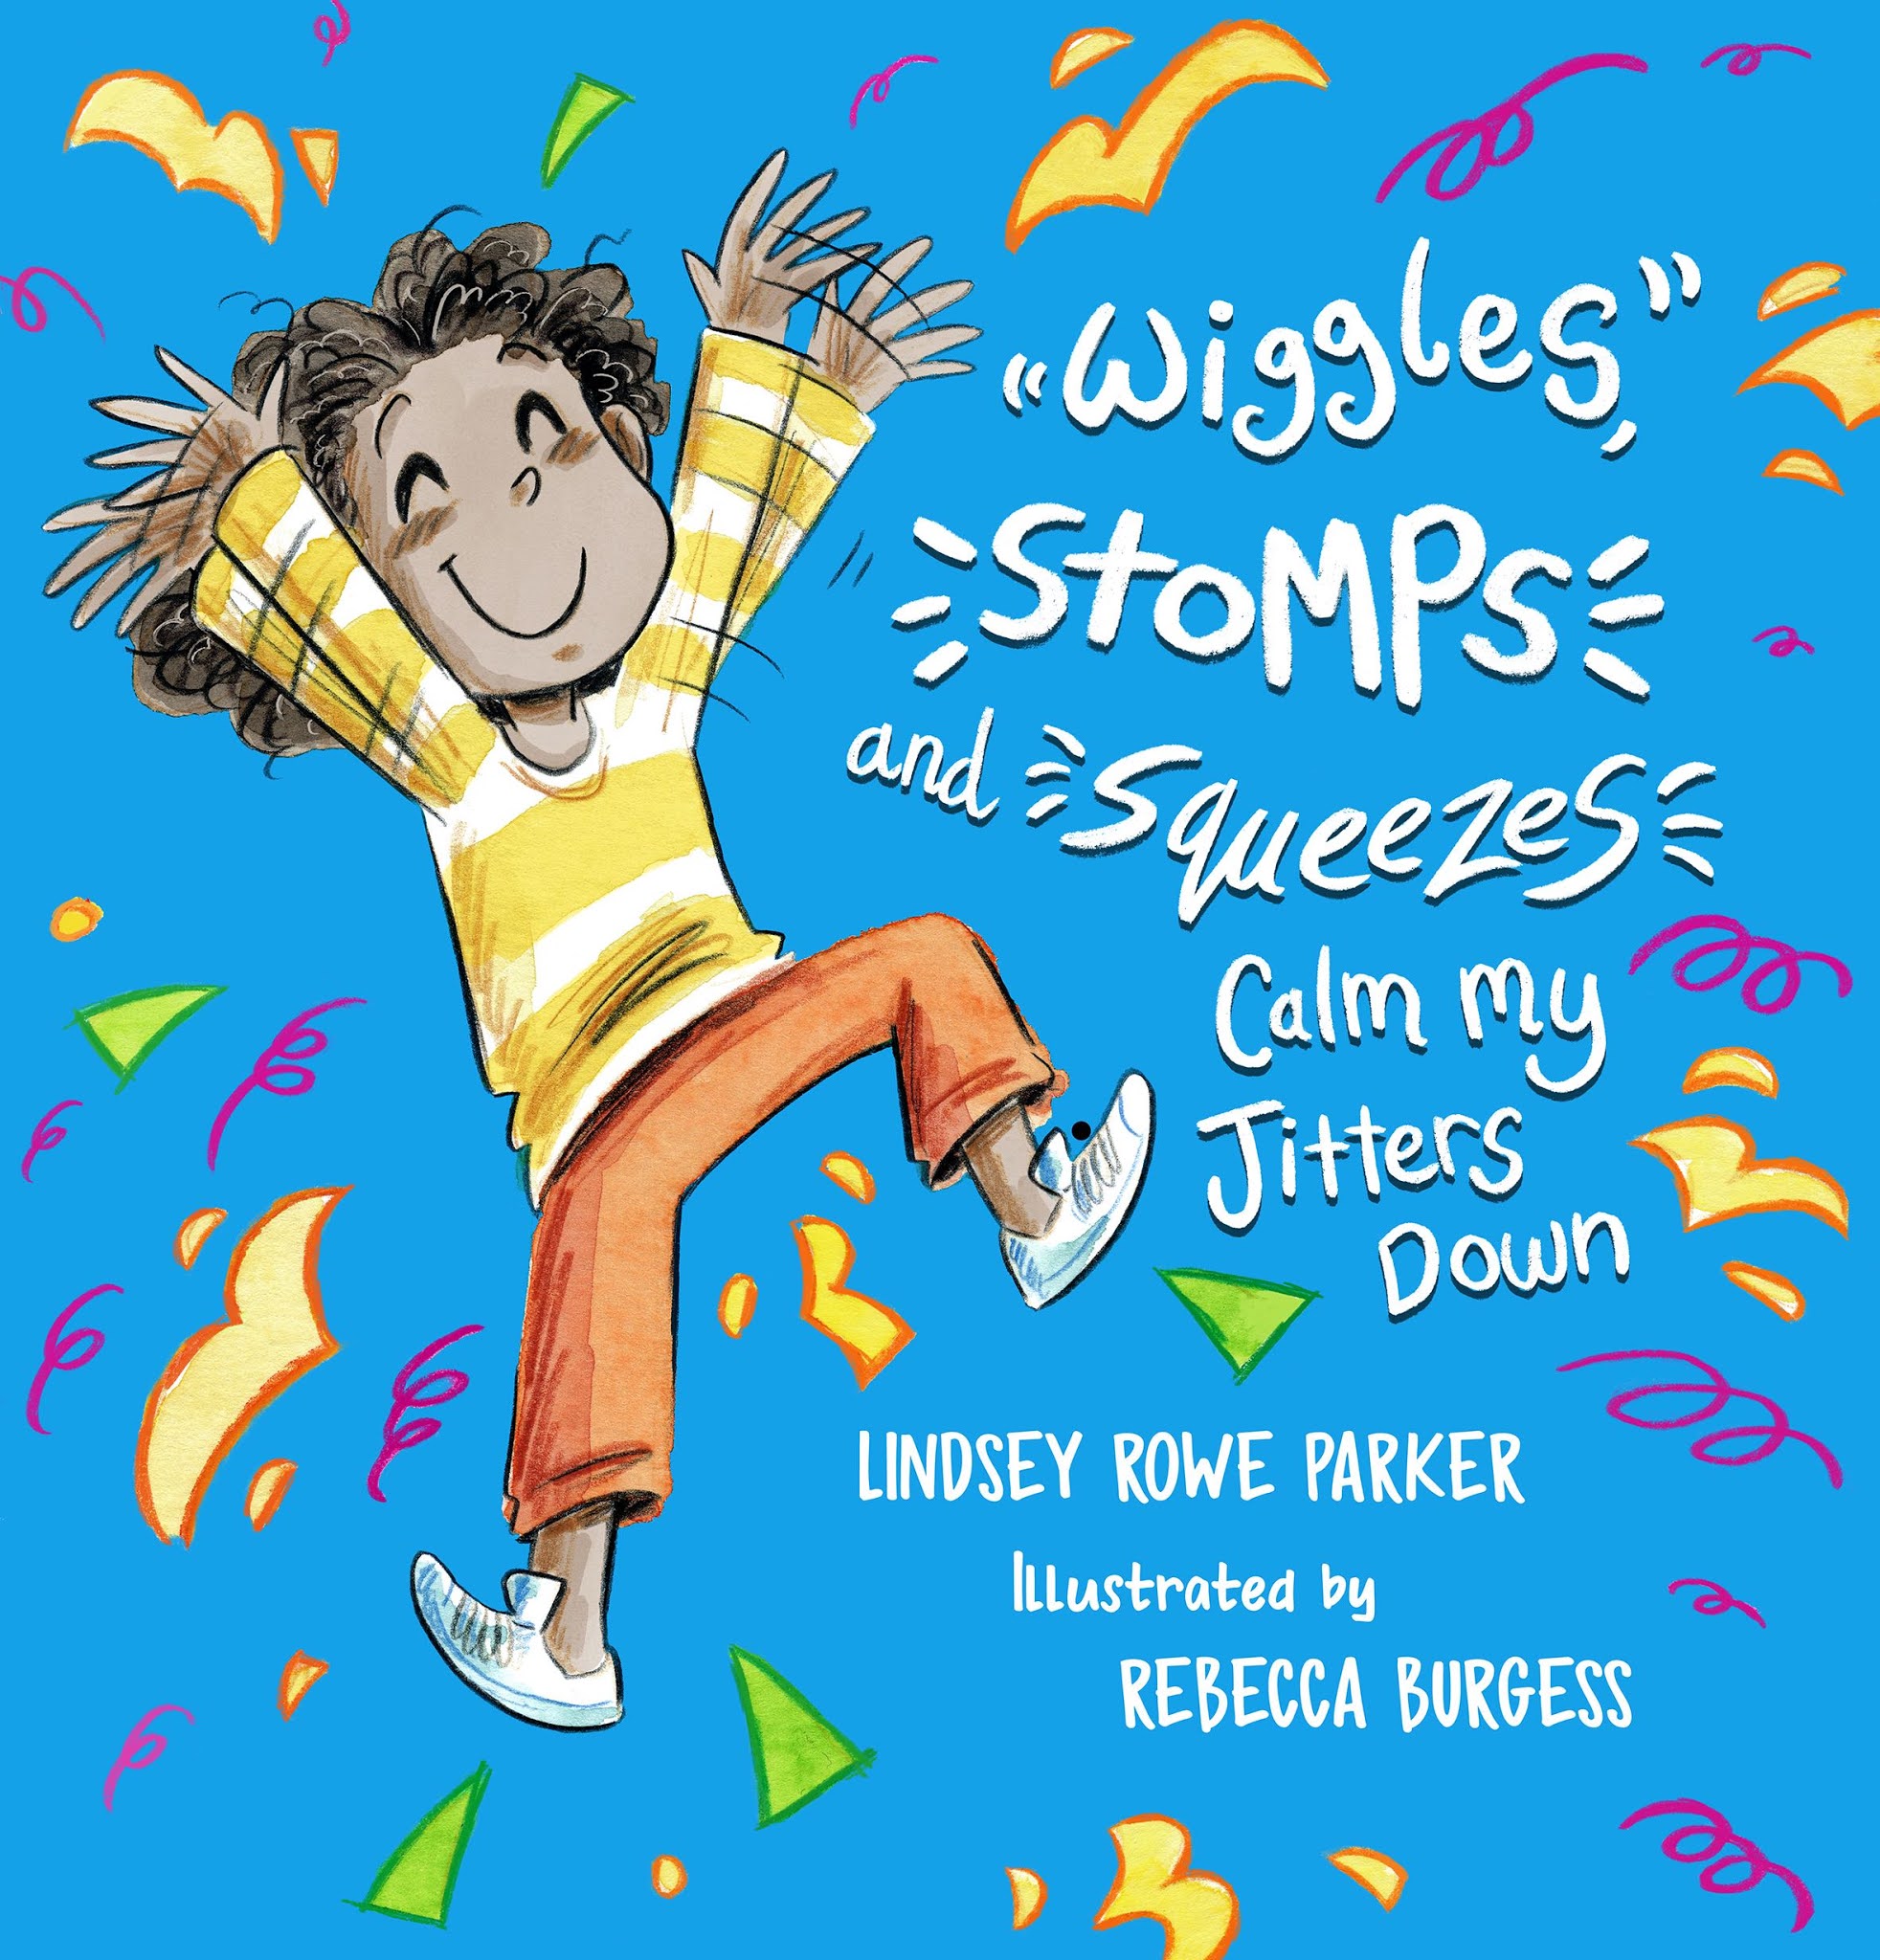 Wiggles, Stomps & Squeezes Calm My Jitters Down